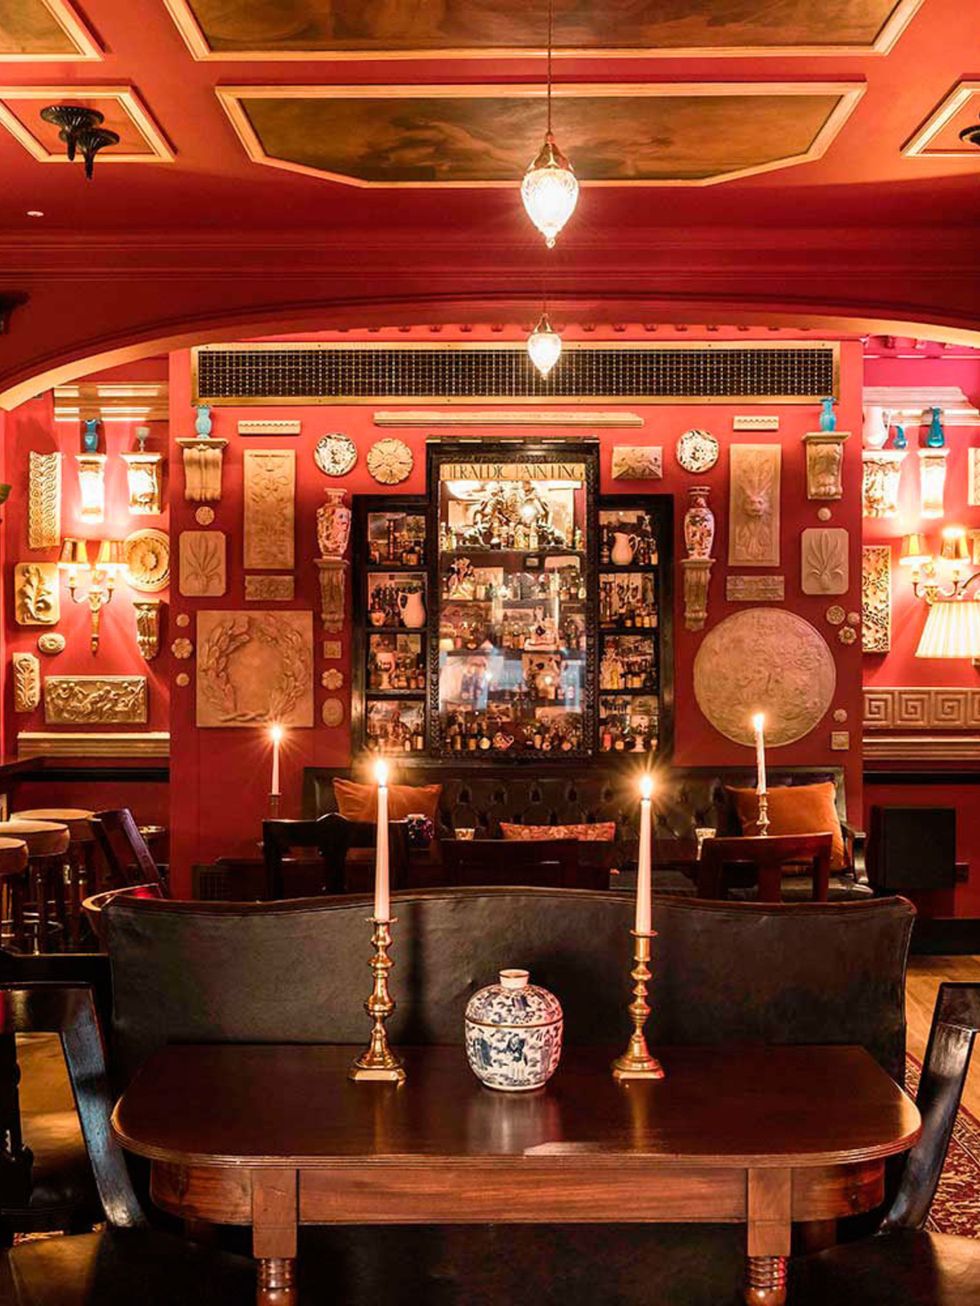 <p>DRINK: Zetter Townhouse Marylebone</p>

<p>Now, when someone gets described as the &lsquo;Willy Wonka of cocktails&rsquo;, we sit up and take notice. The Willy Wonka of chocolate was pretty good, but compared to a grass-infused gin Dubonnet martini wit